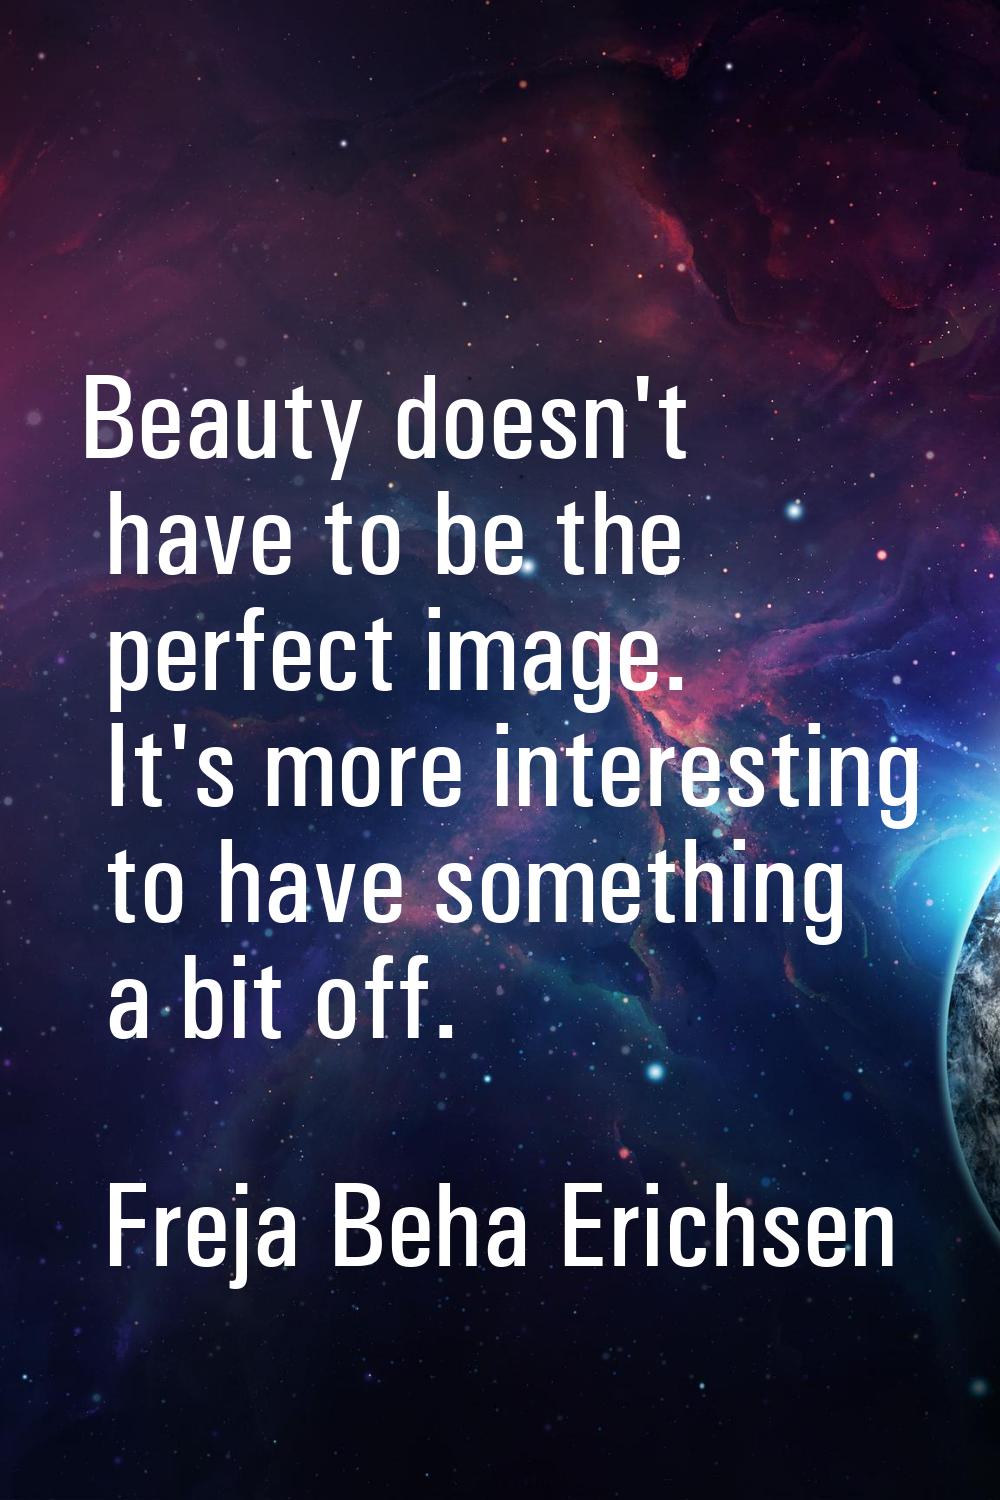 Beauty doesn't have to be the perfect image. It's more interesting to have something a bit off.